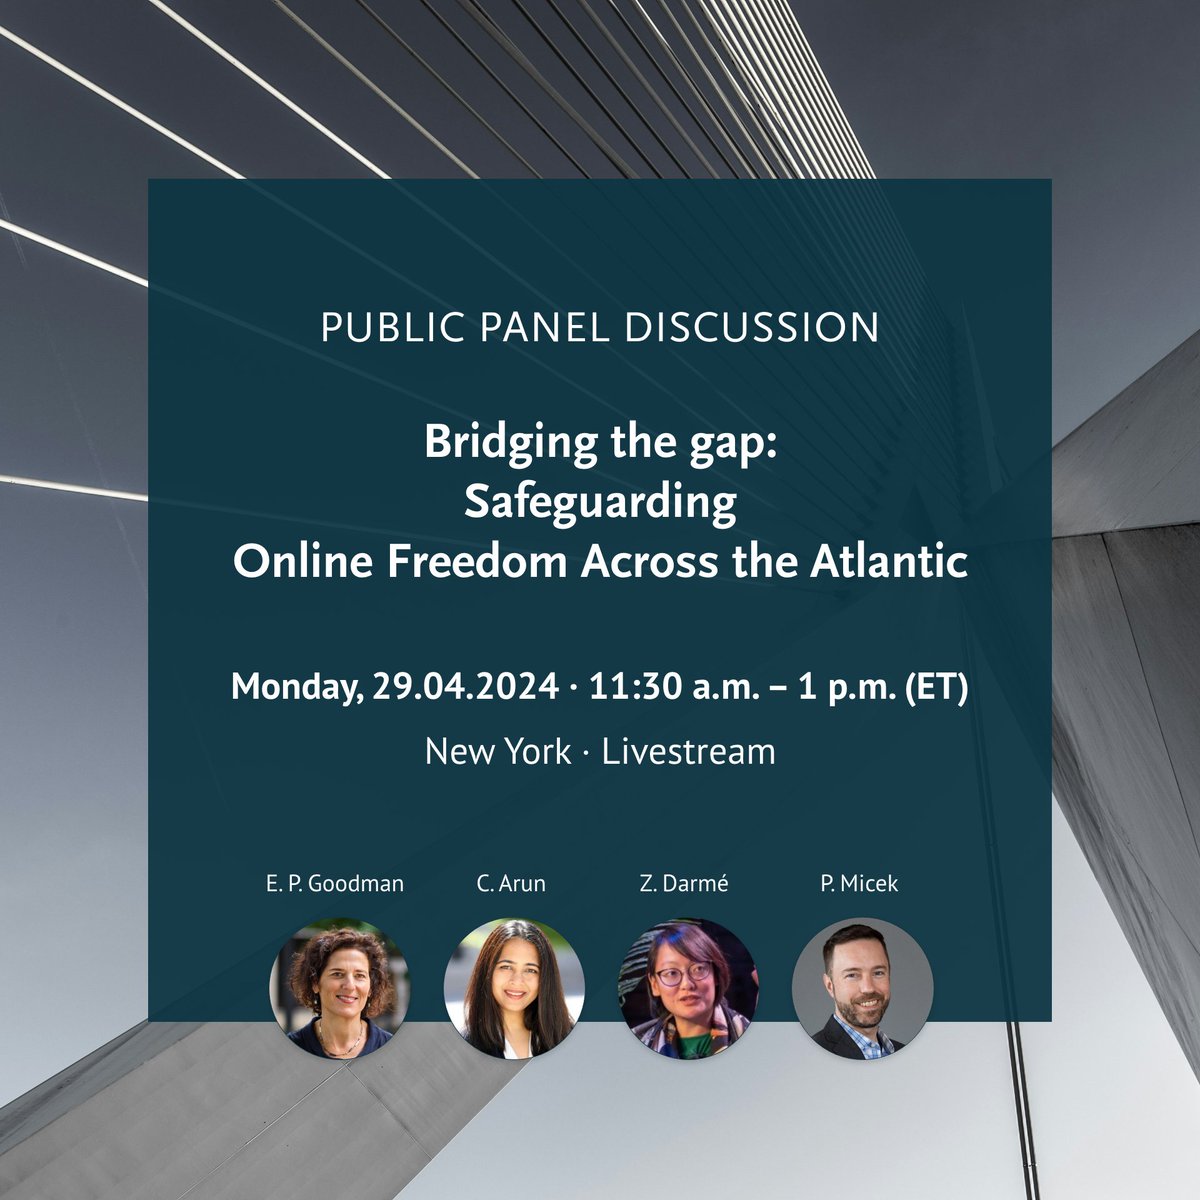 Only one week to go! Don't miss our panel on regulating #FreeSpeech on #socialmedia in #NYC on Apr 29. Discuss freedom & democratic discourse online w/ our experts @ellgood, @lawyerpants, @ZoeDarme and Chinmayi Arun (@yaleisp). @dwih_ny @GermanyNY 👉hiig.de/en/events/safe…